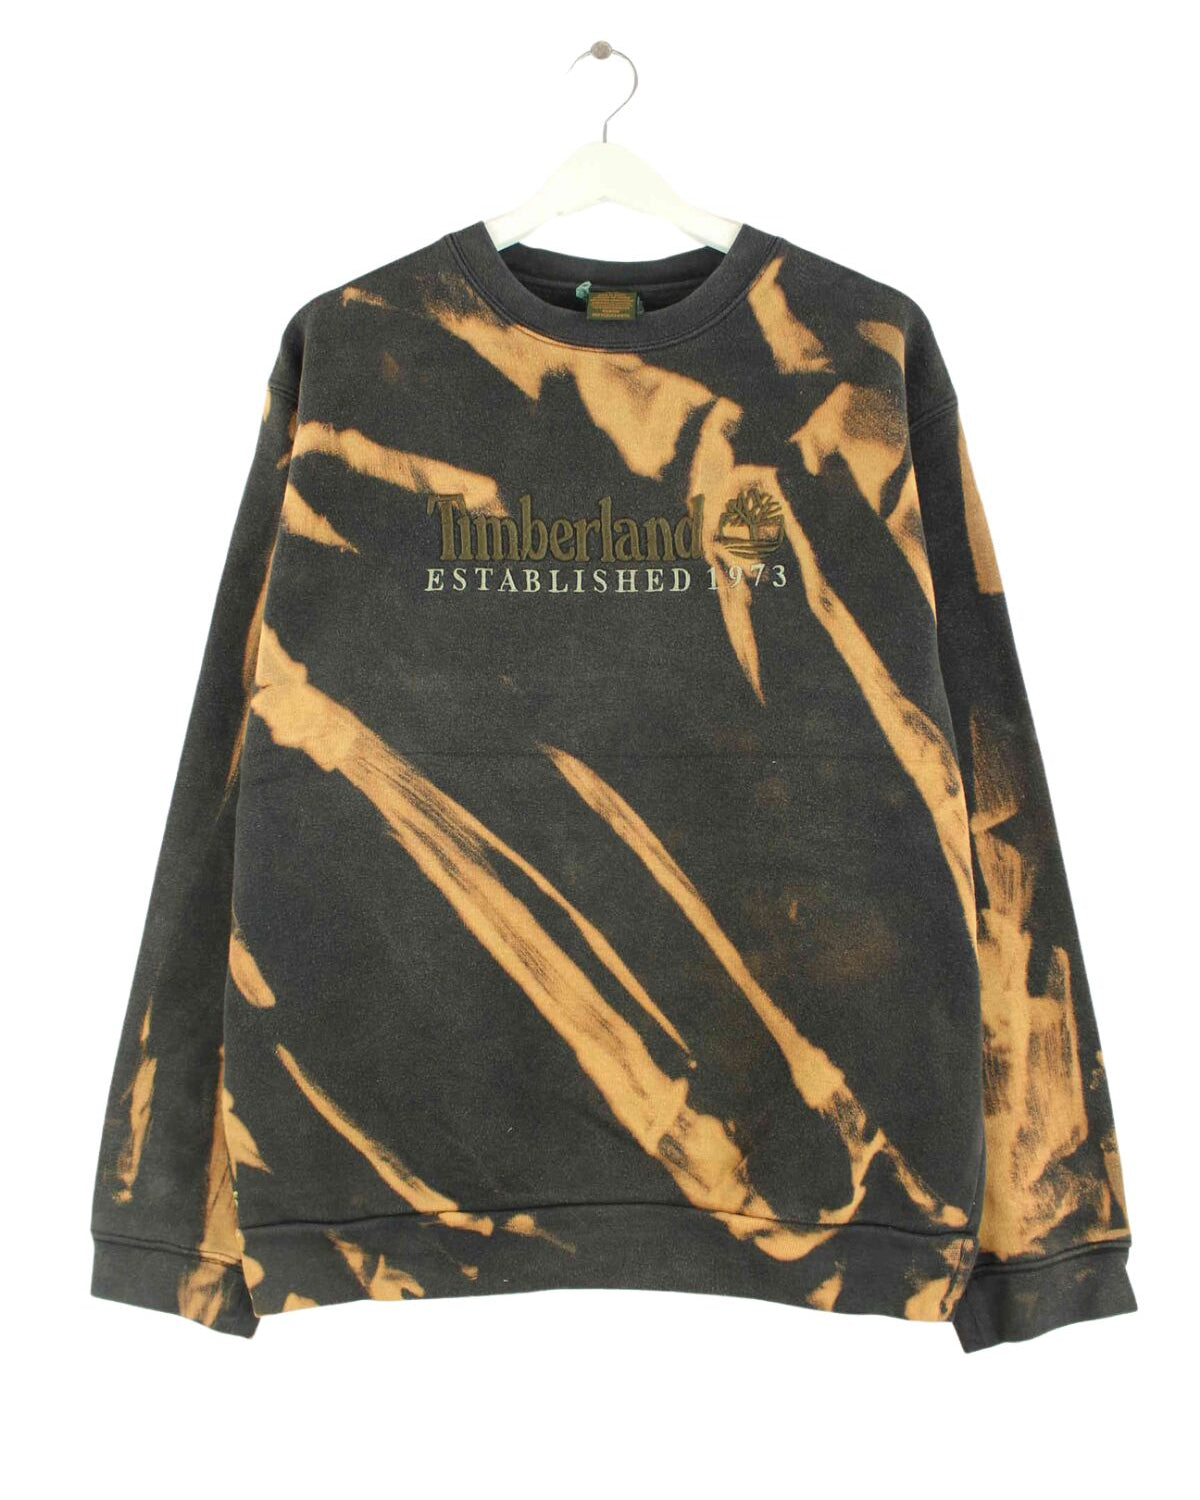 Timberland 90s Vintage Embroidered Tie Dye Sweater Schwarz M (front image)